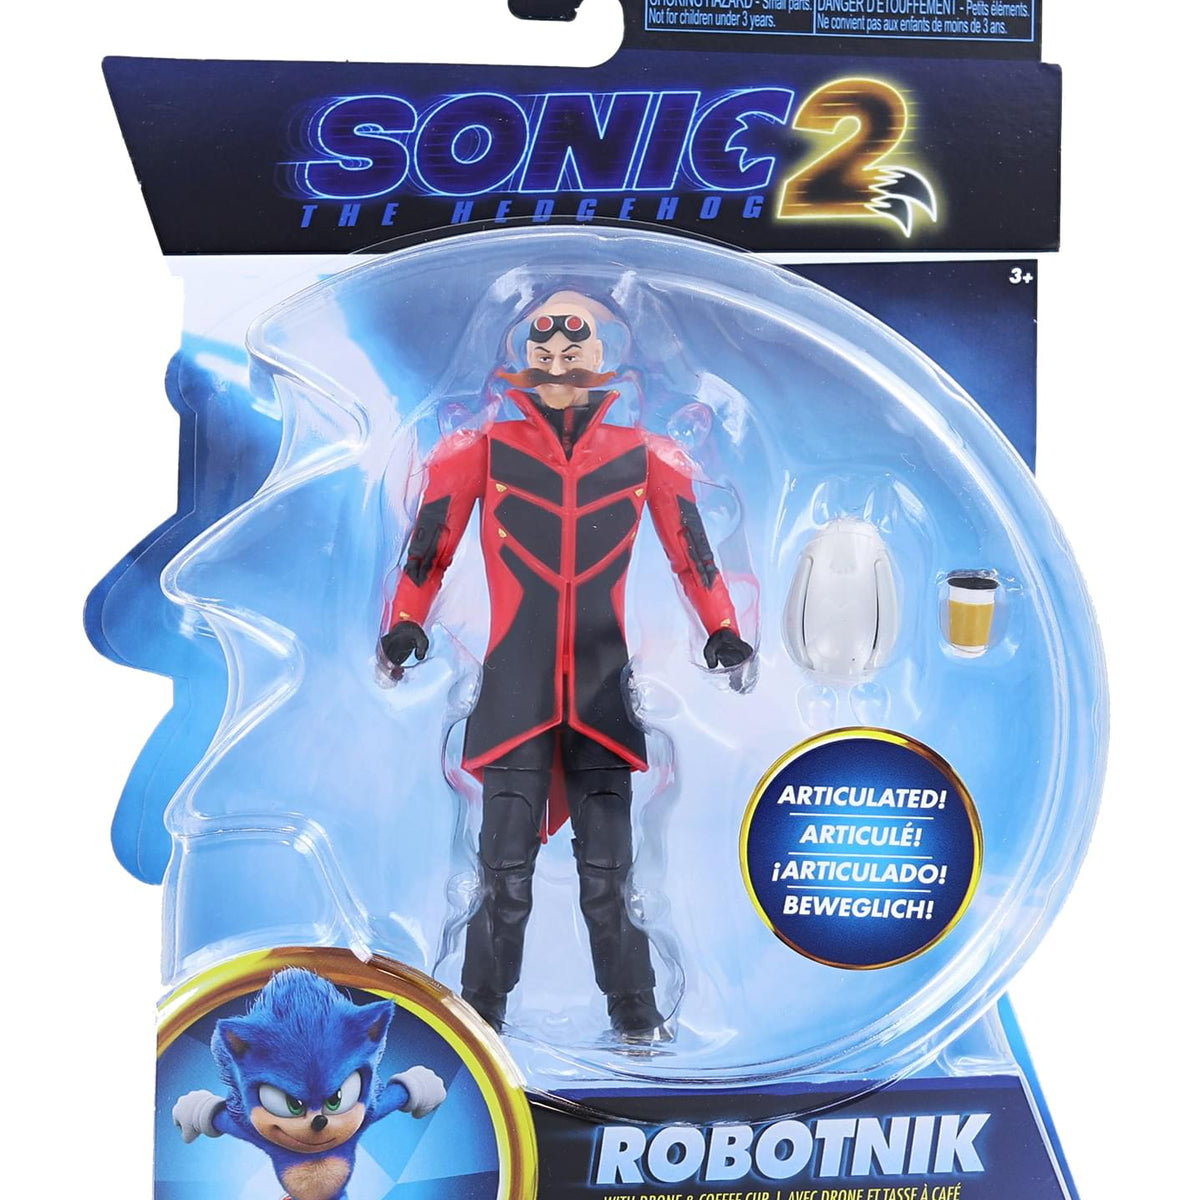 Jakks Pacific, Paramount Pictures Preview 'Sonic the Hedgehog 2' Toys,  Costumes - The Toy Book